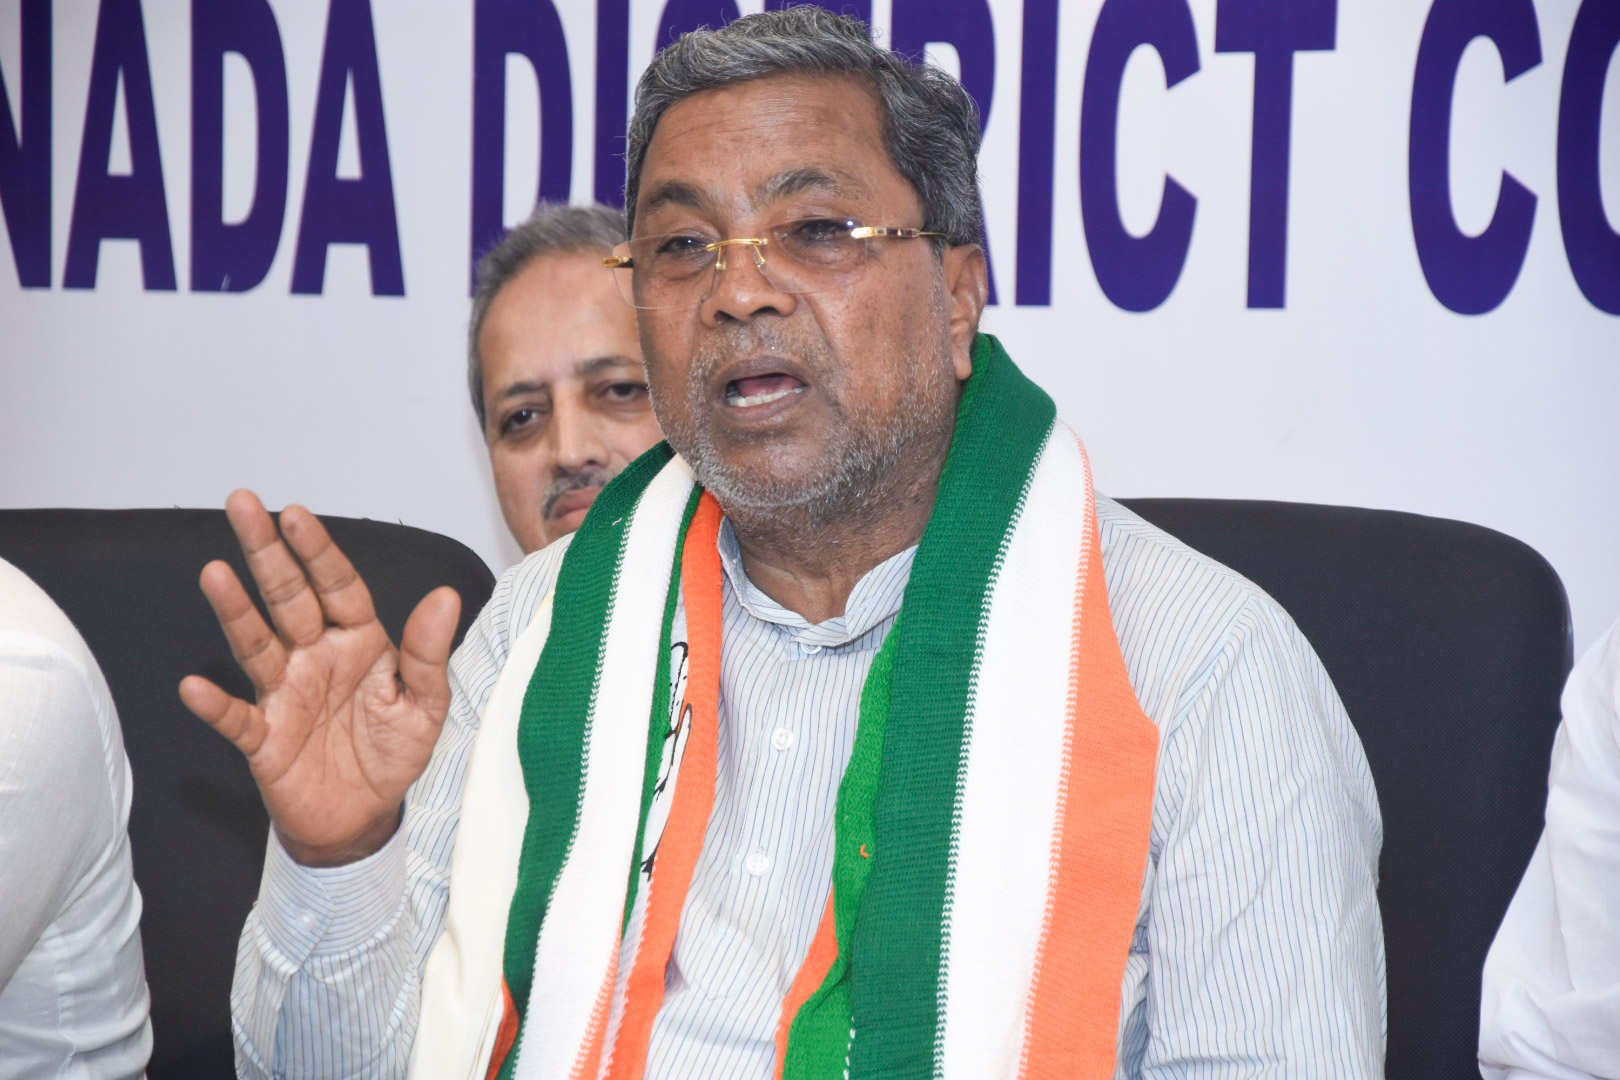 Congress opposed to forcible religious conversion: Siddaramaiah